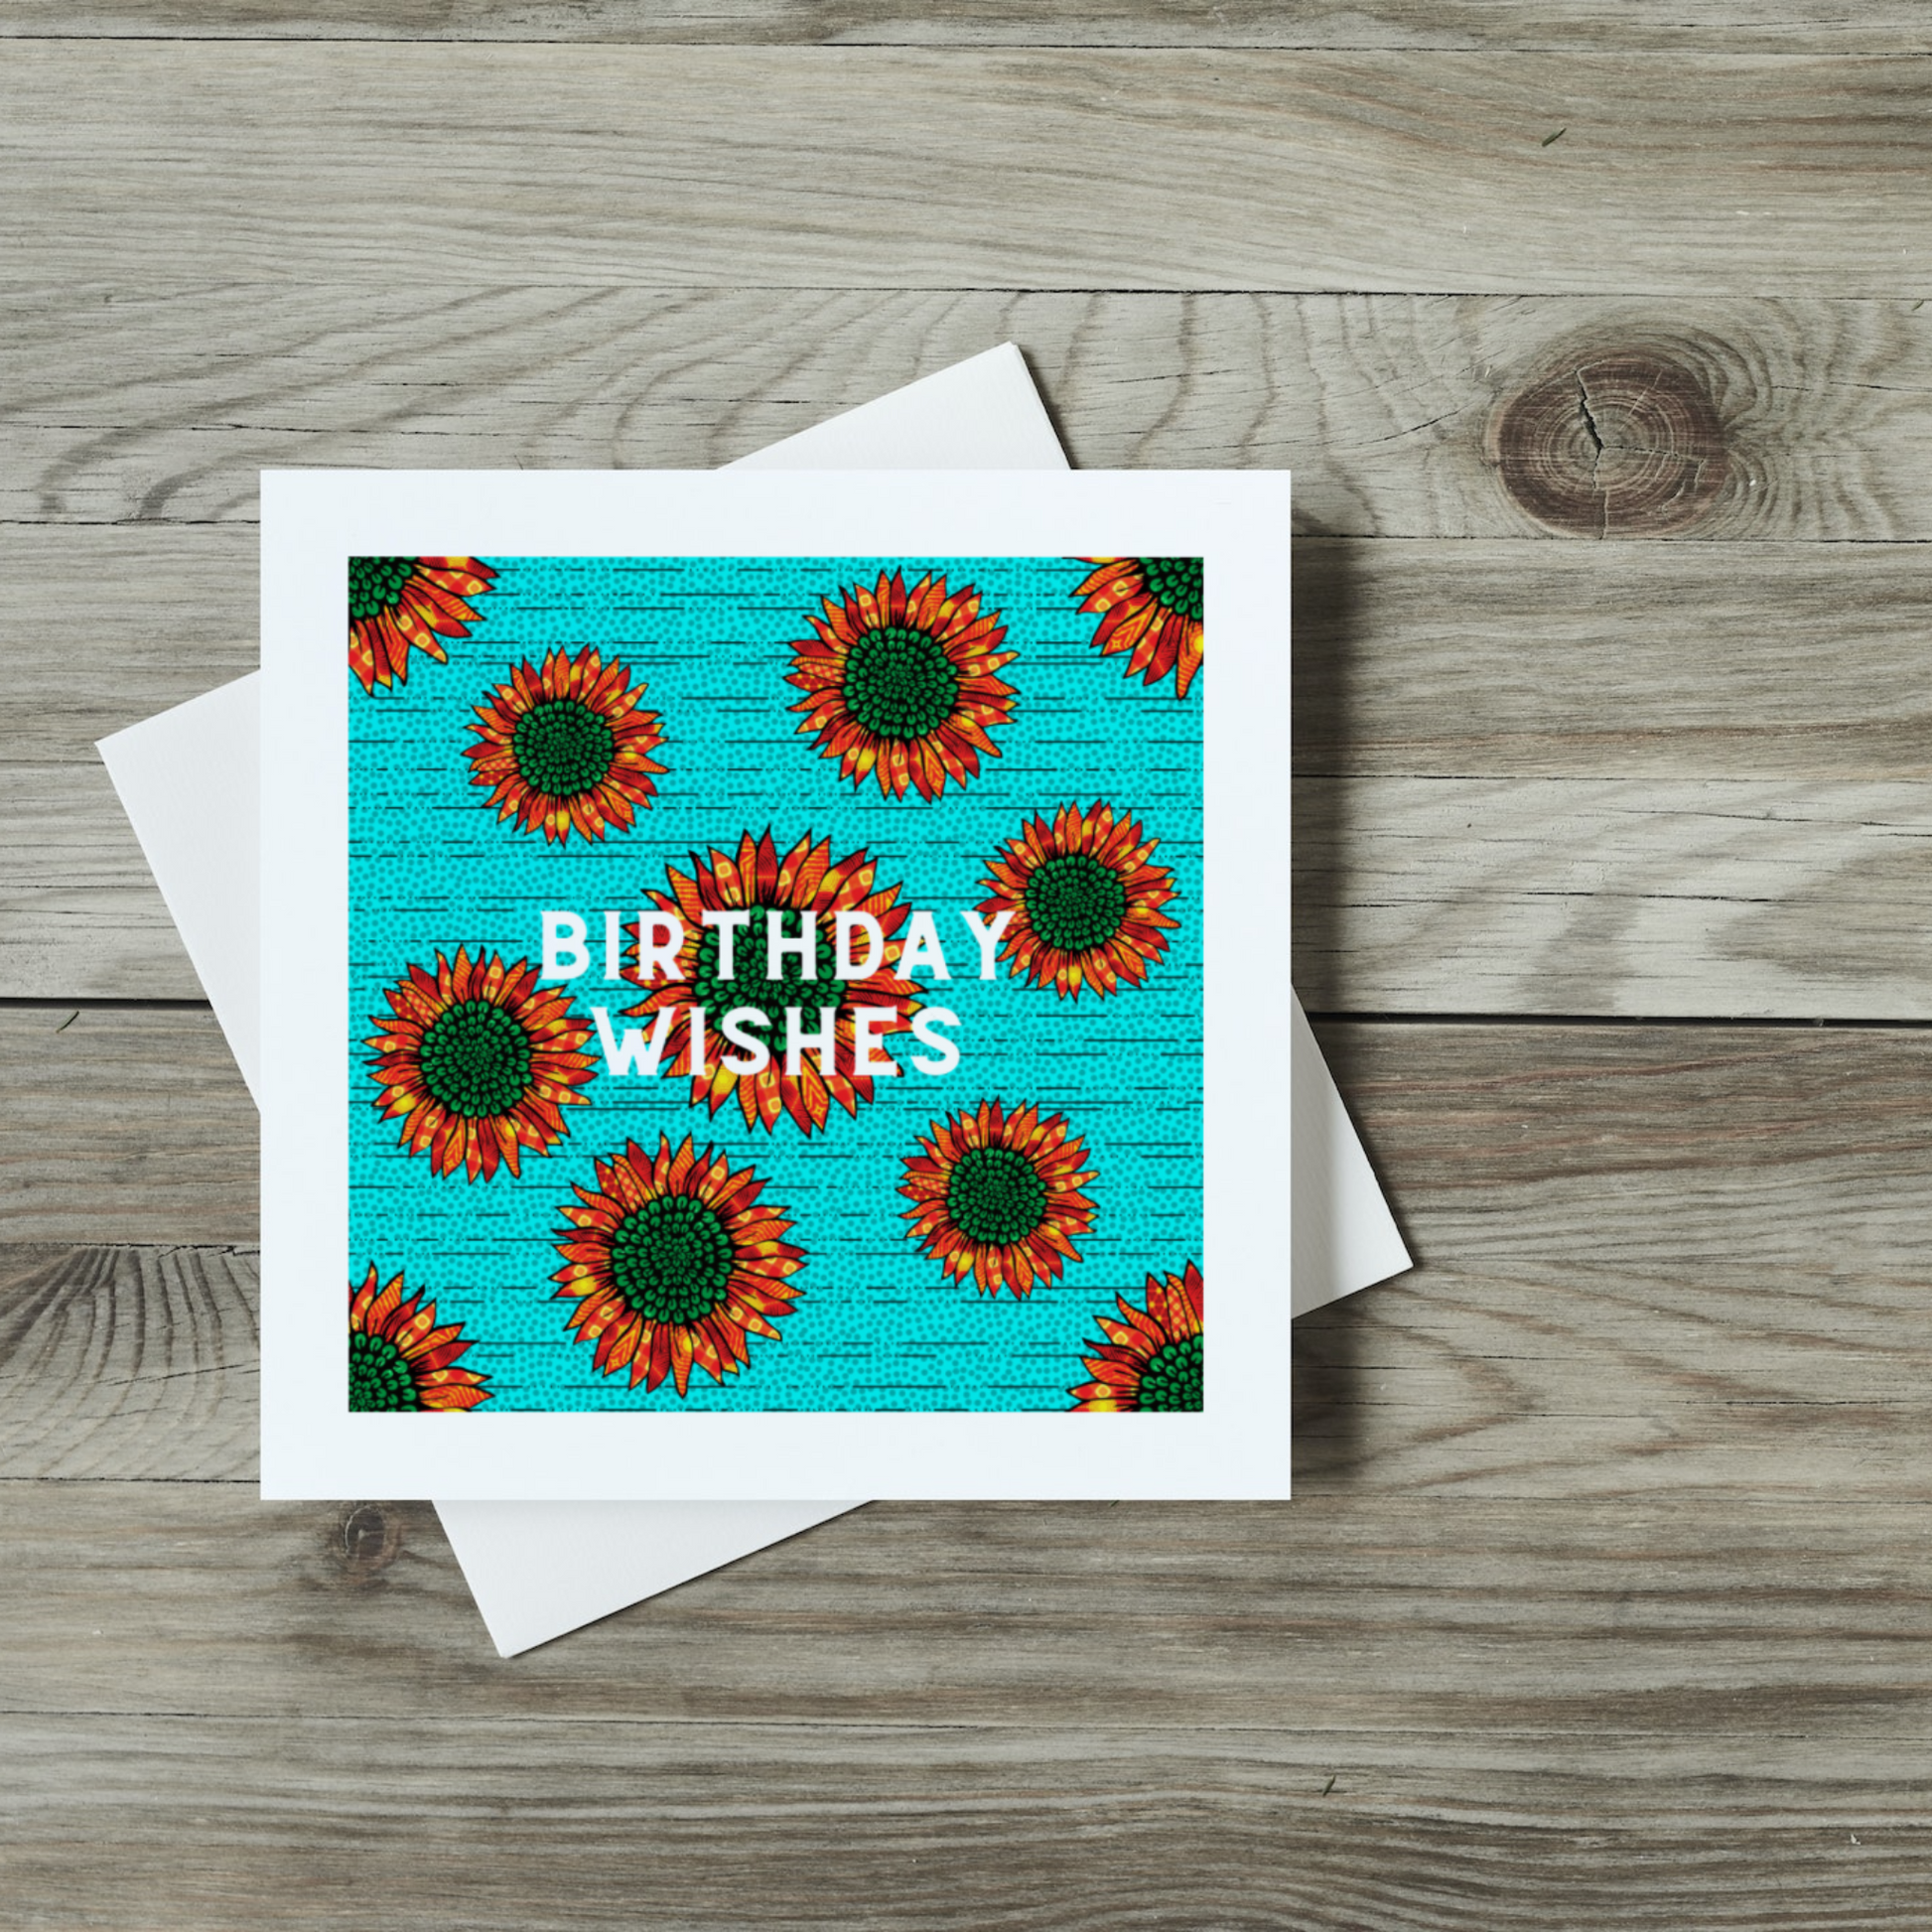 Birthday wishes afrocentric card